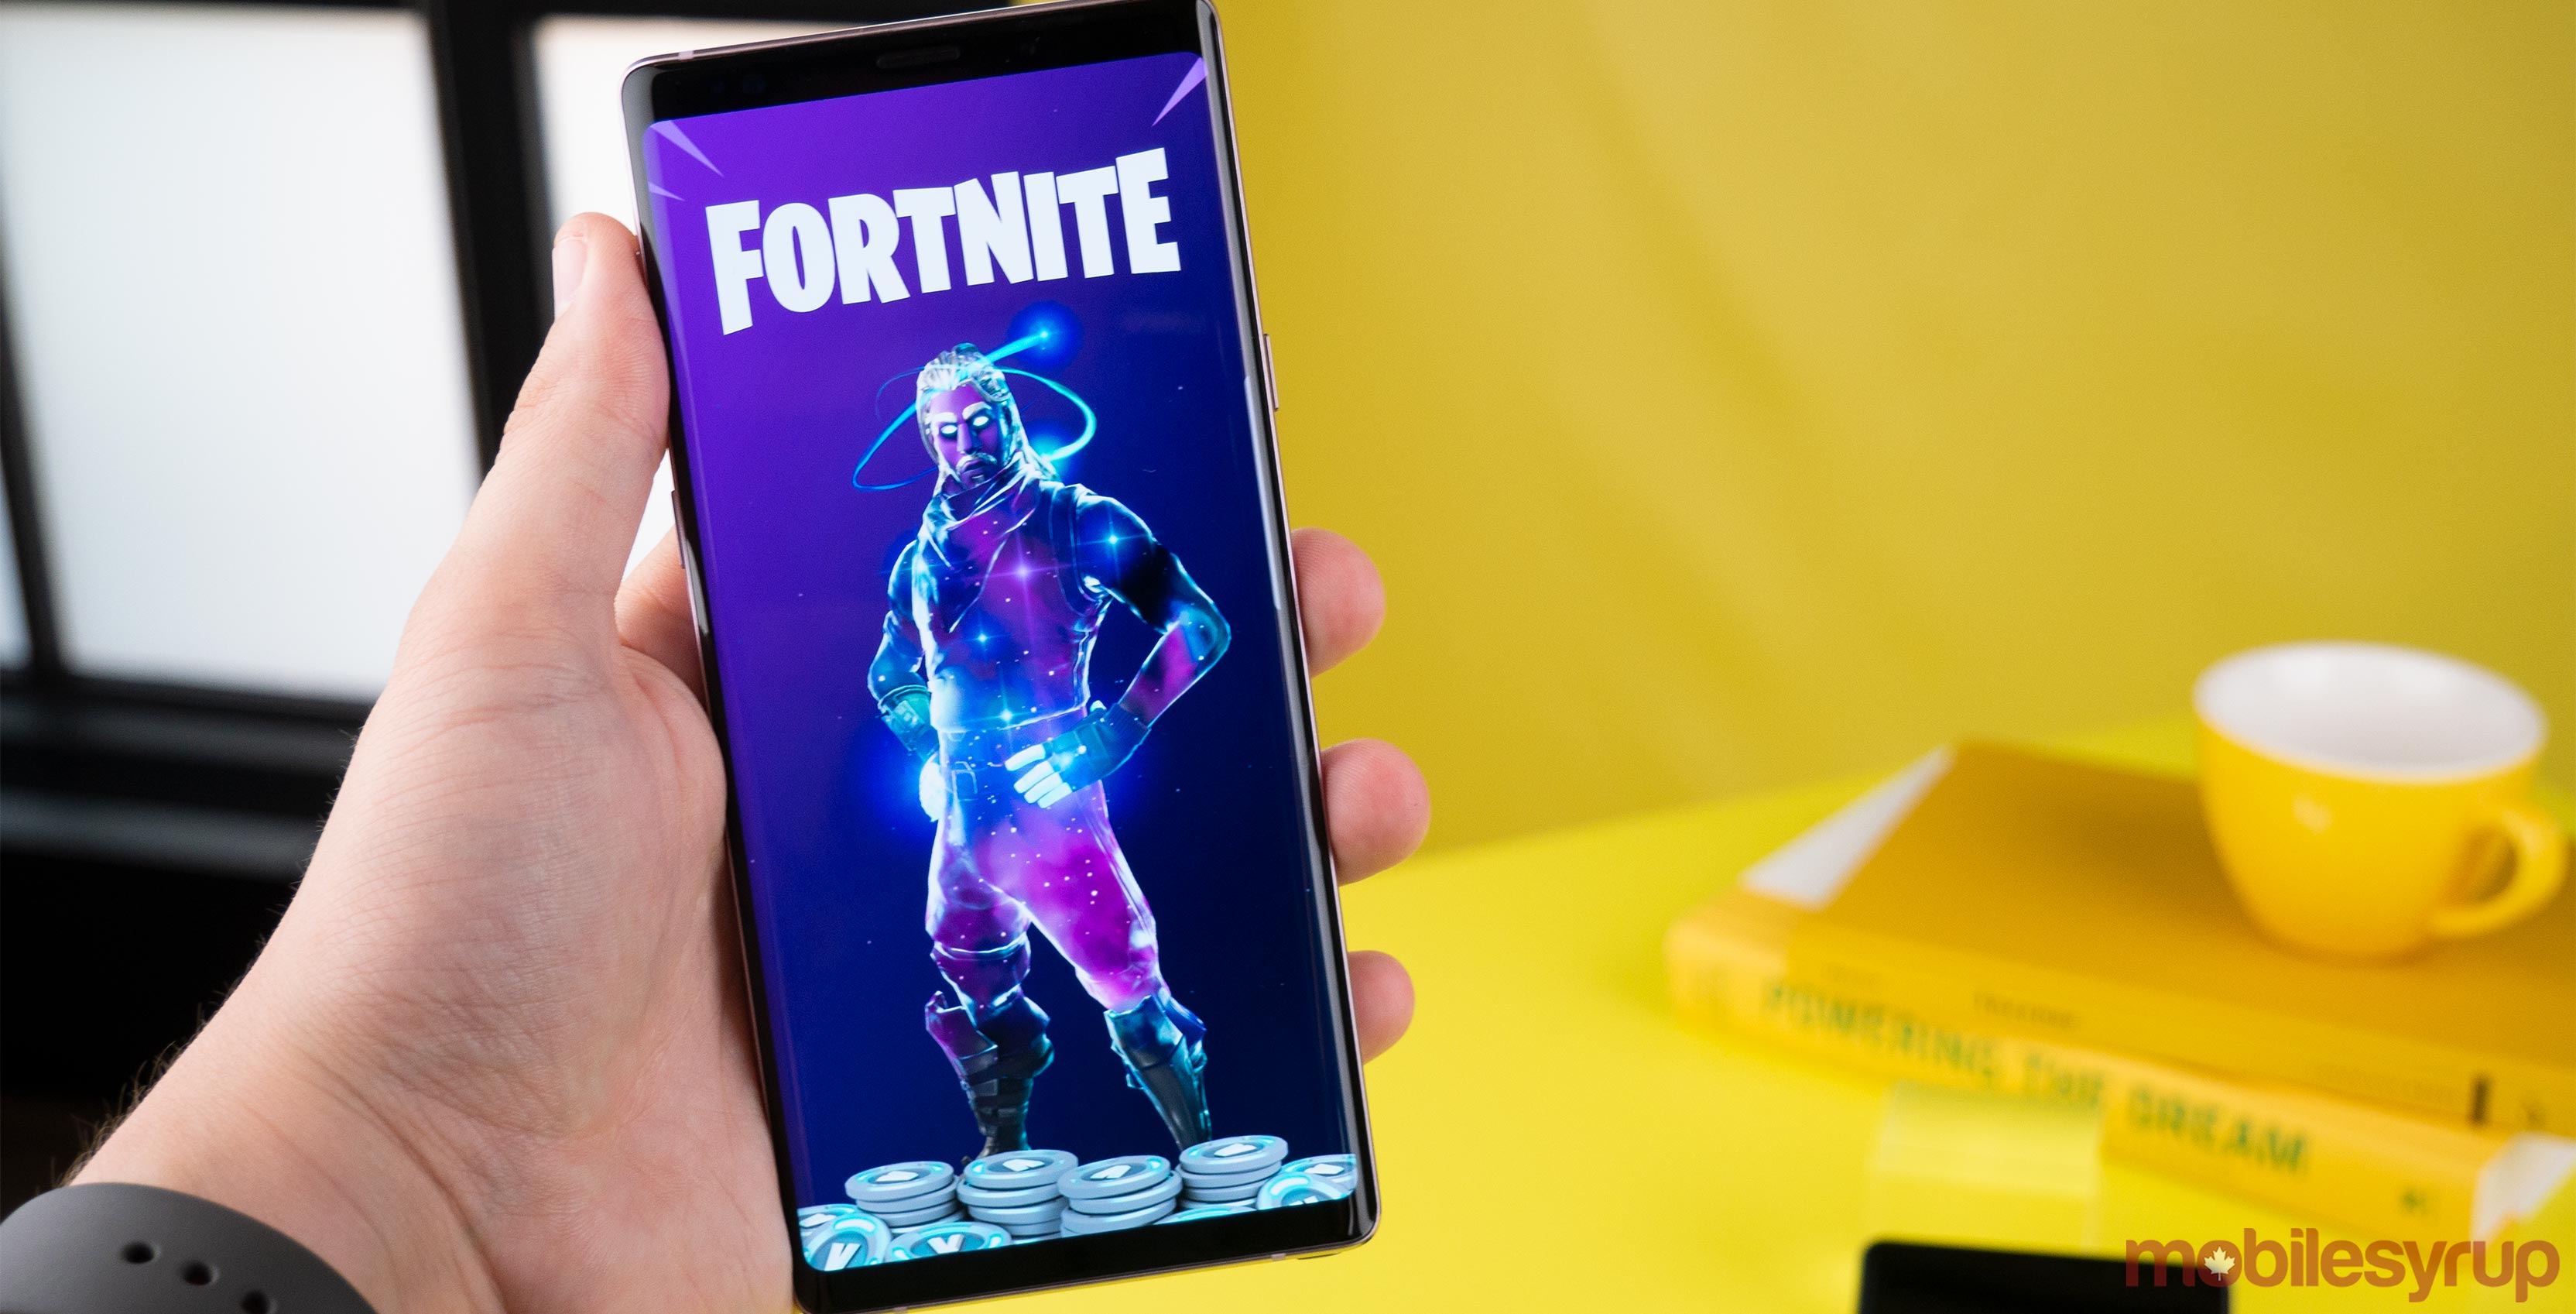 fortnite s long awaited android version has finally launched on samsung mobile devices in beta samsung announced at its unpacked note 9 event in new york - ios 12 beta 4 fortnite